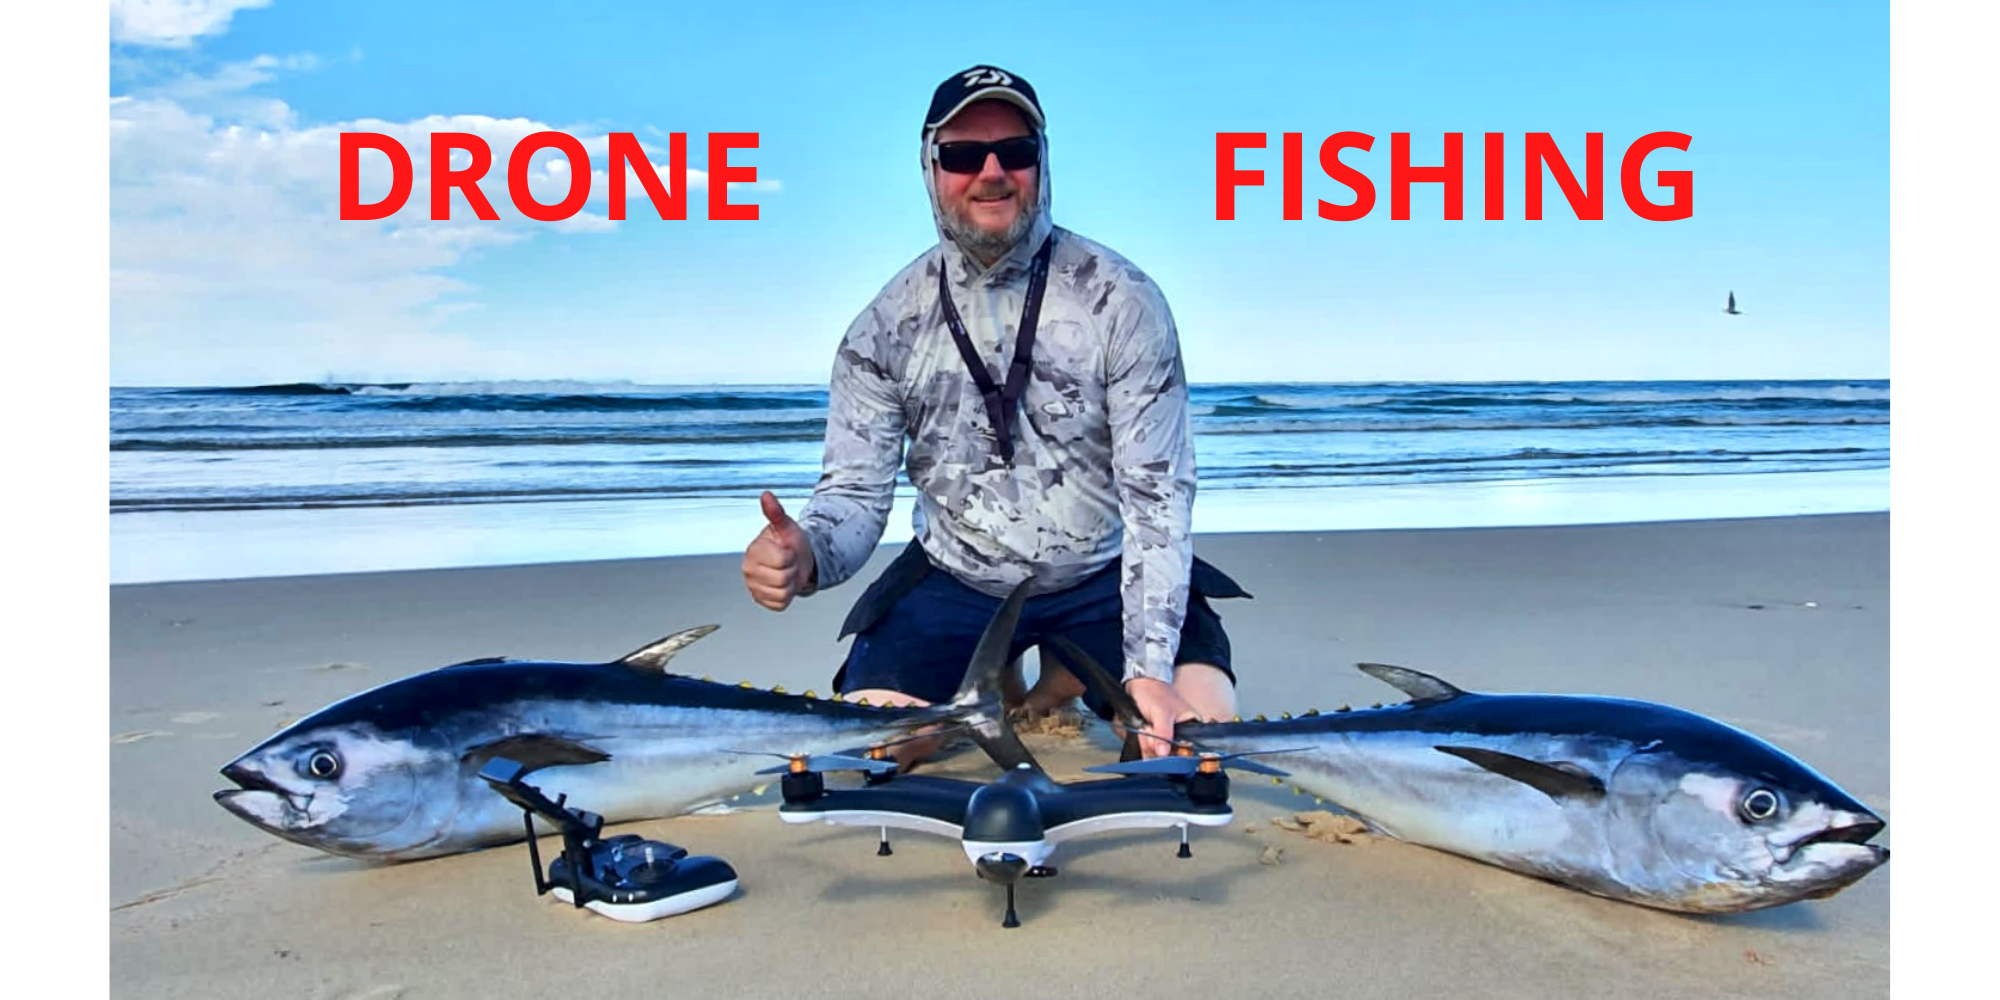 Duke mulighed Patriotisk This might just get you hooked on drone fishing - DroneDJ